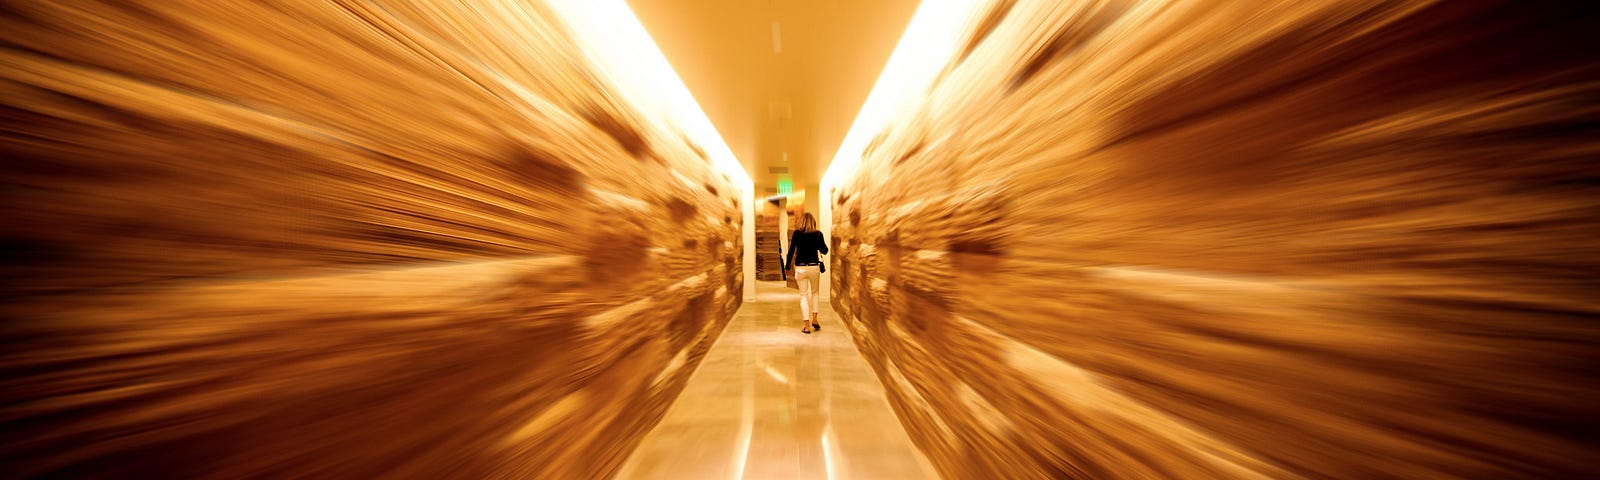 A blurred image of an aisle in a grocery store, focused on the center where a woman is walking.